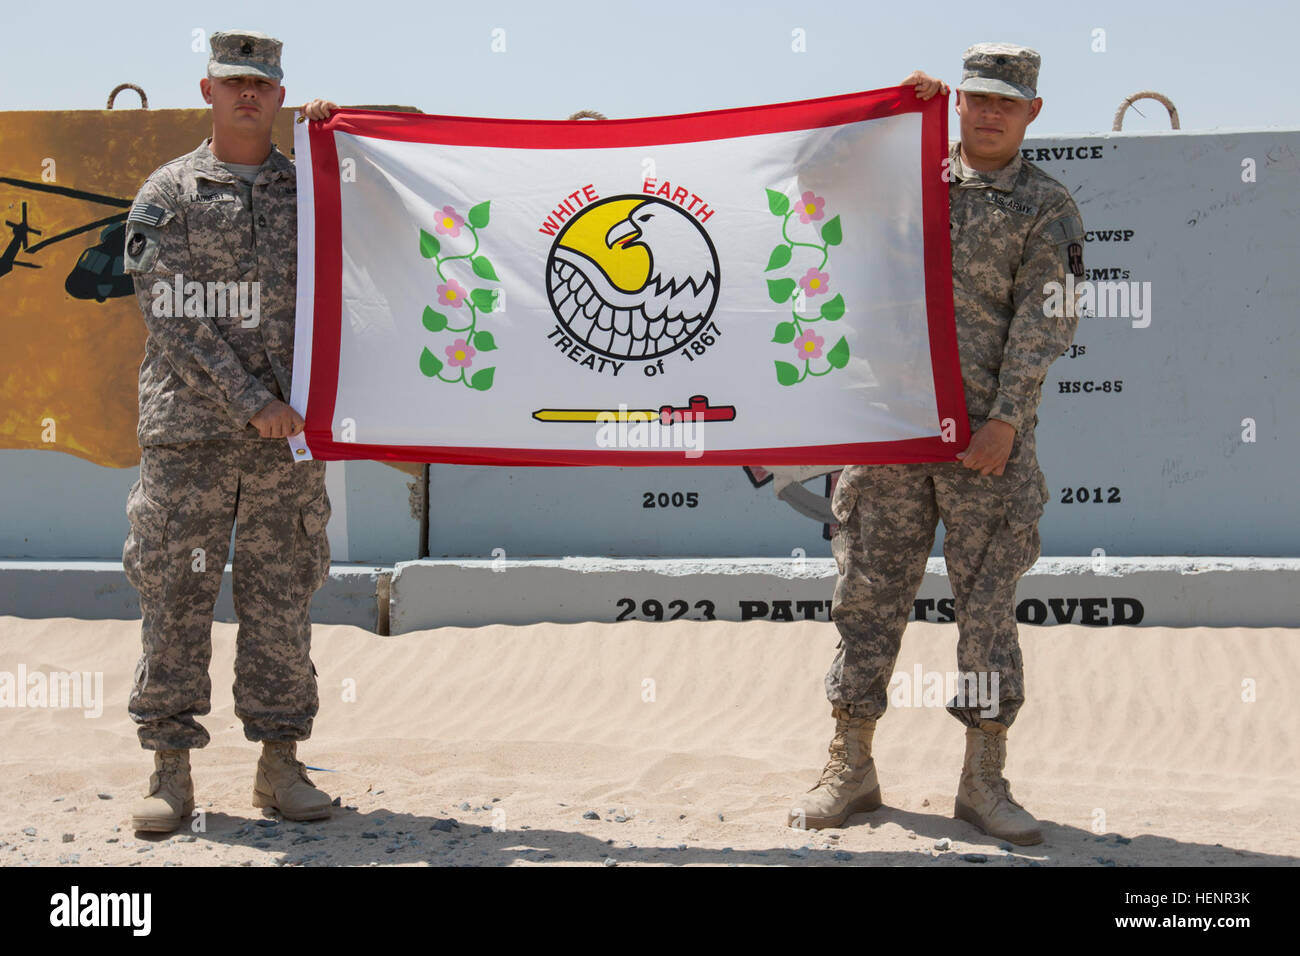 From left: Sgt. 1st Class Laudert, an intelligence analyst with the 34th Combat Aviation Brigade of the Minnesota National Guard and his brother, Spc. Cameron Laudert, a health care specialist with the 452nd Combat Support Hospital, U.S. Army Reserve, show their respect for their Native American heritage, displaying the White Earth Nation flag. They are deployed to Camp Buerhing in support of Operation Enduring Freedom-Kuwait. (Minnesota Army National Guard photo by 1st Lt. Holly Elkin/Released) Minnesota brothers reunite in Kuwait 140901-A-QD498-852 Stock Photo